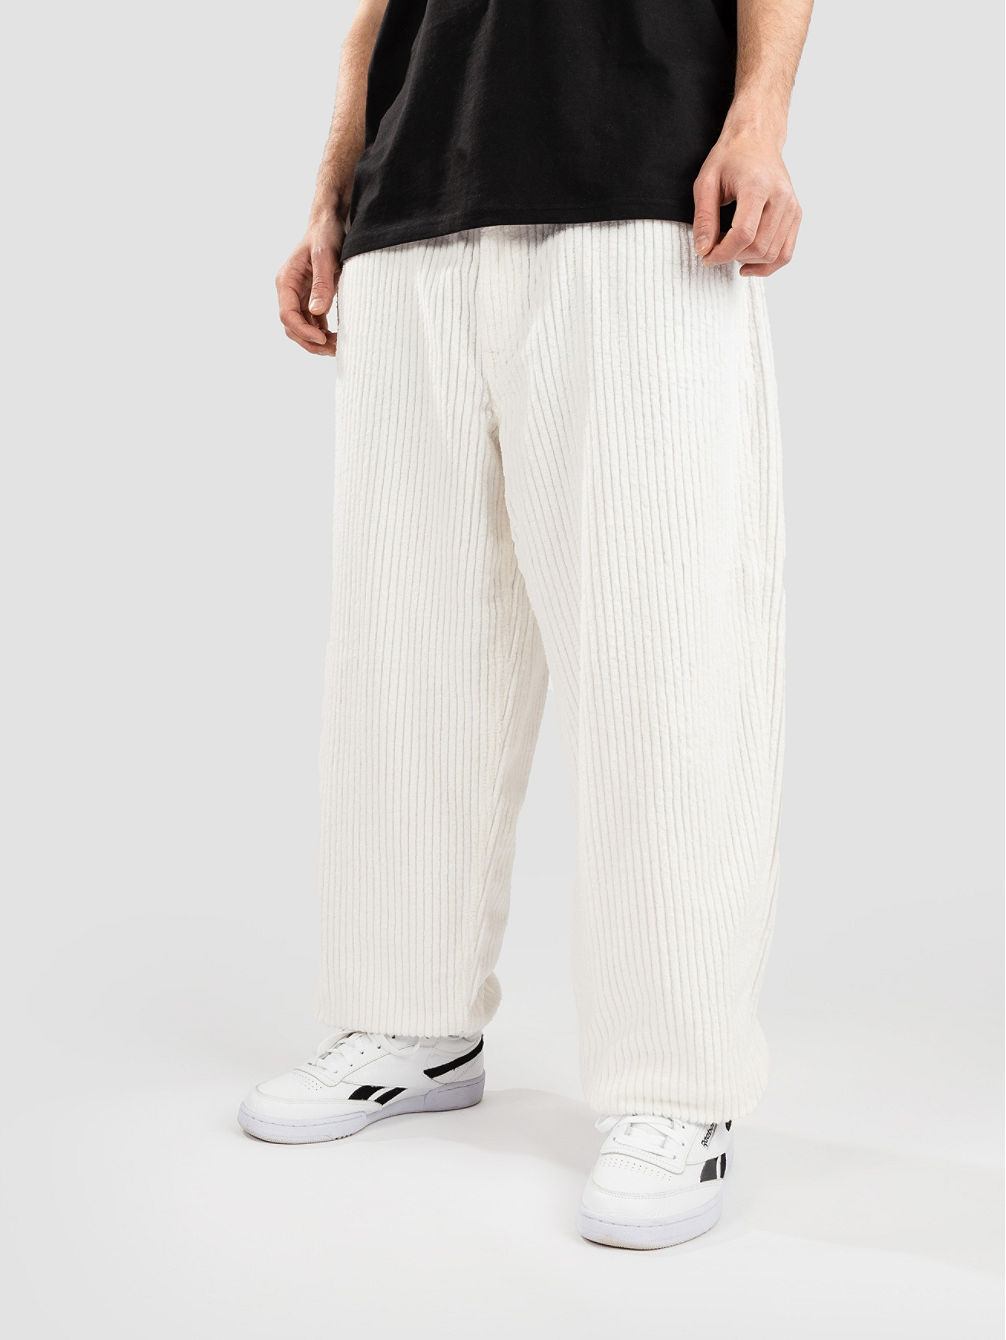 X-Tra Ghost Cord Pants